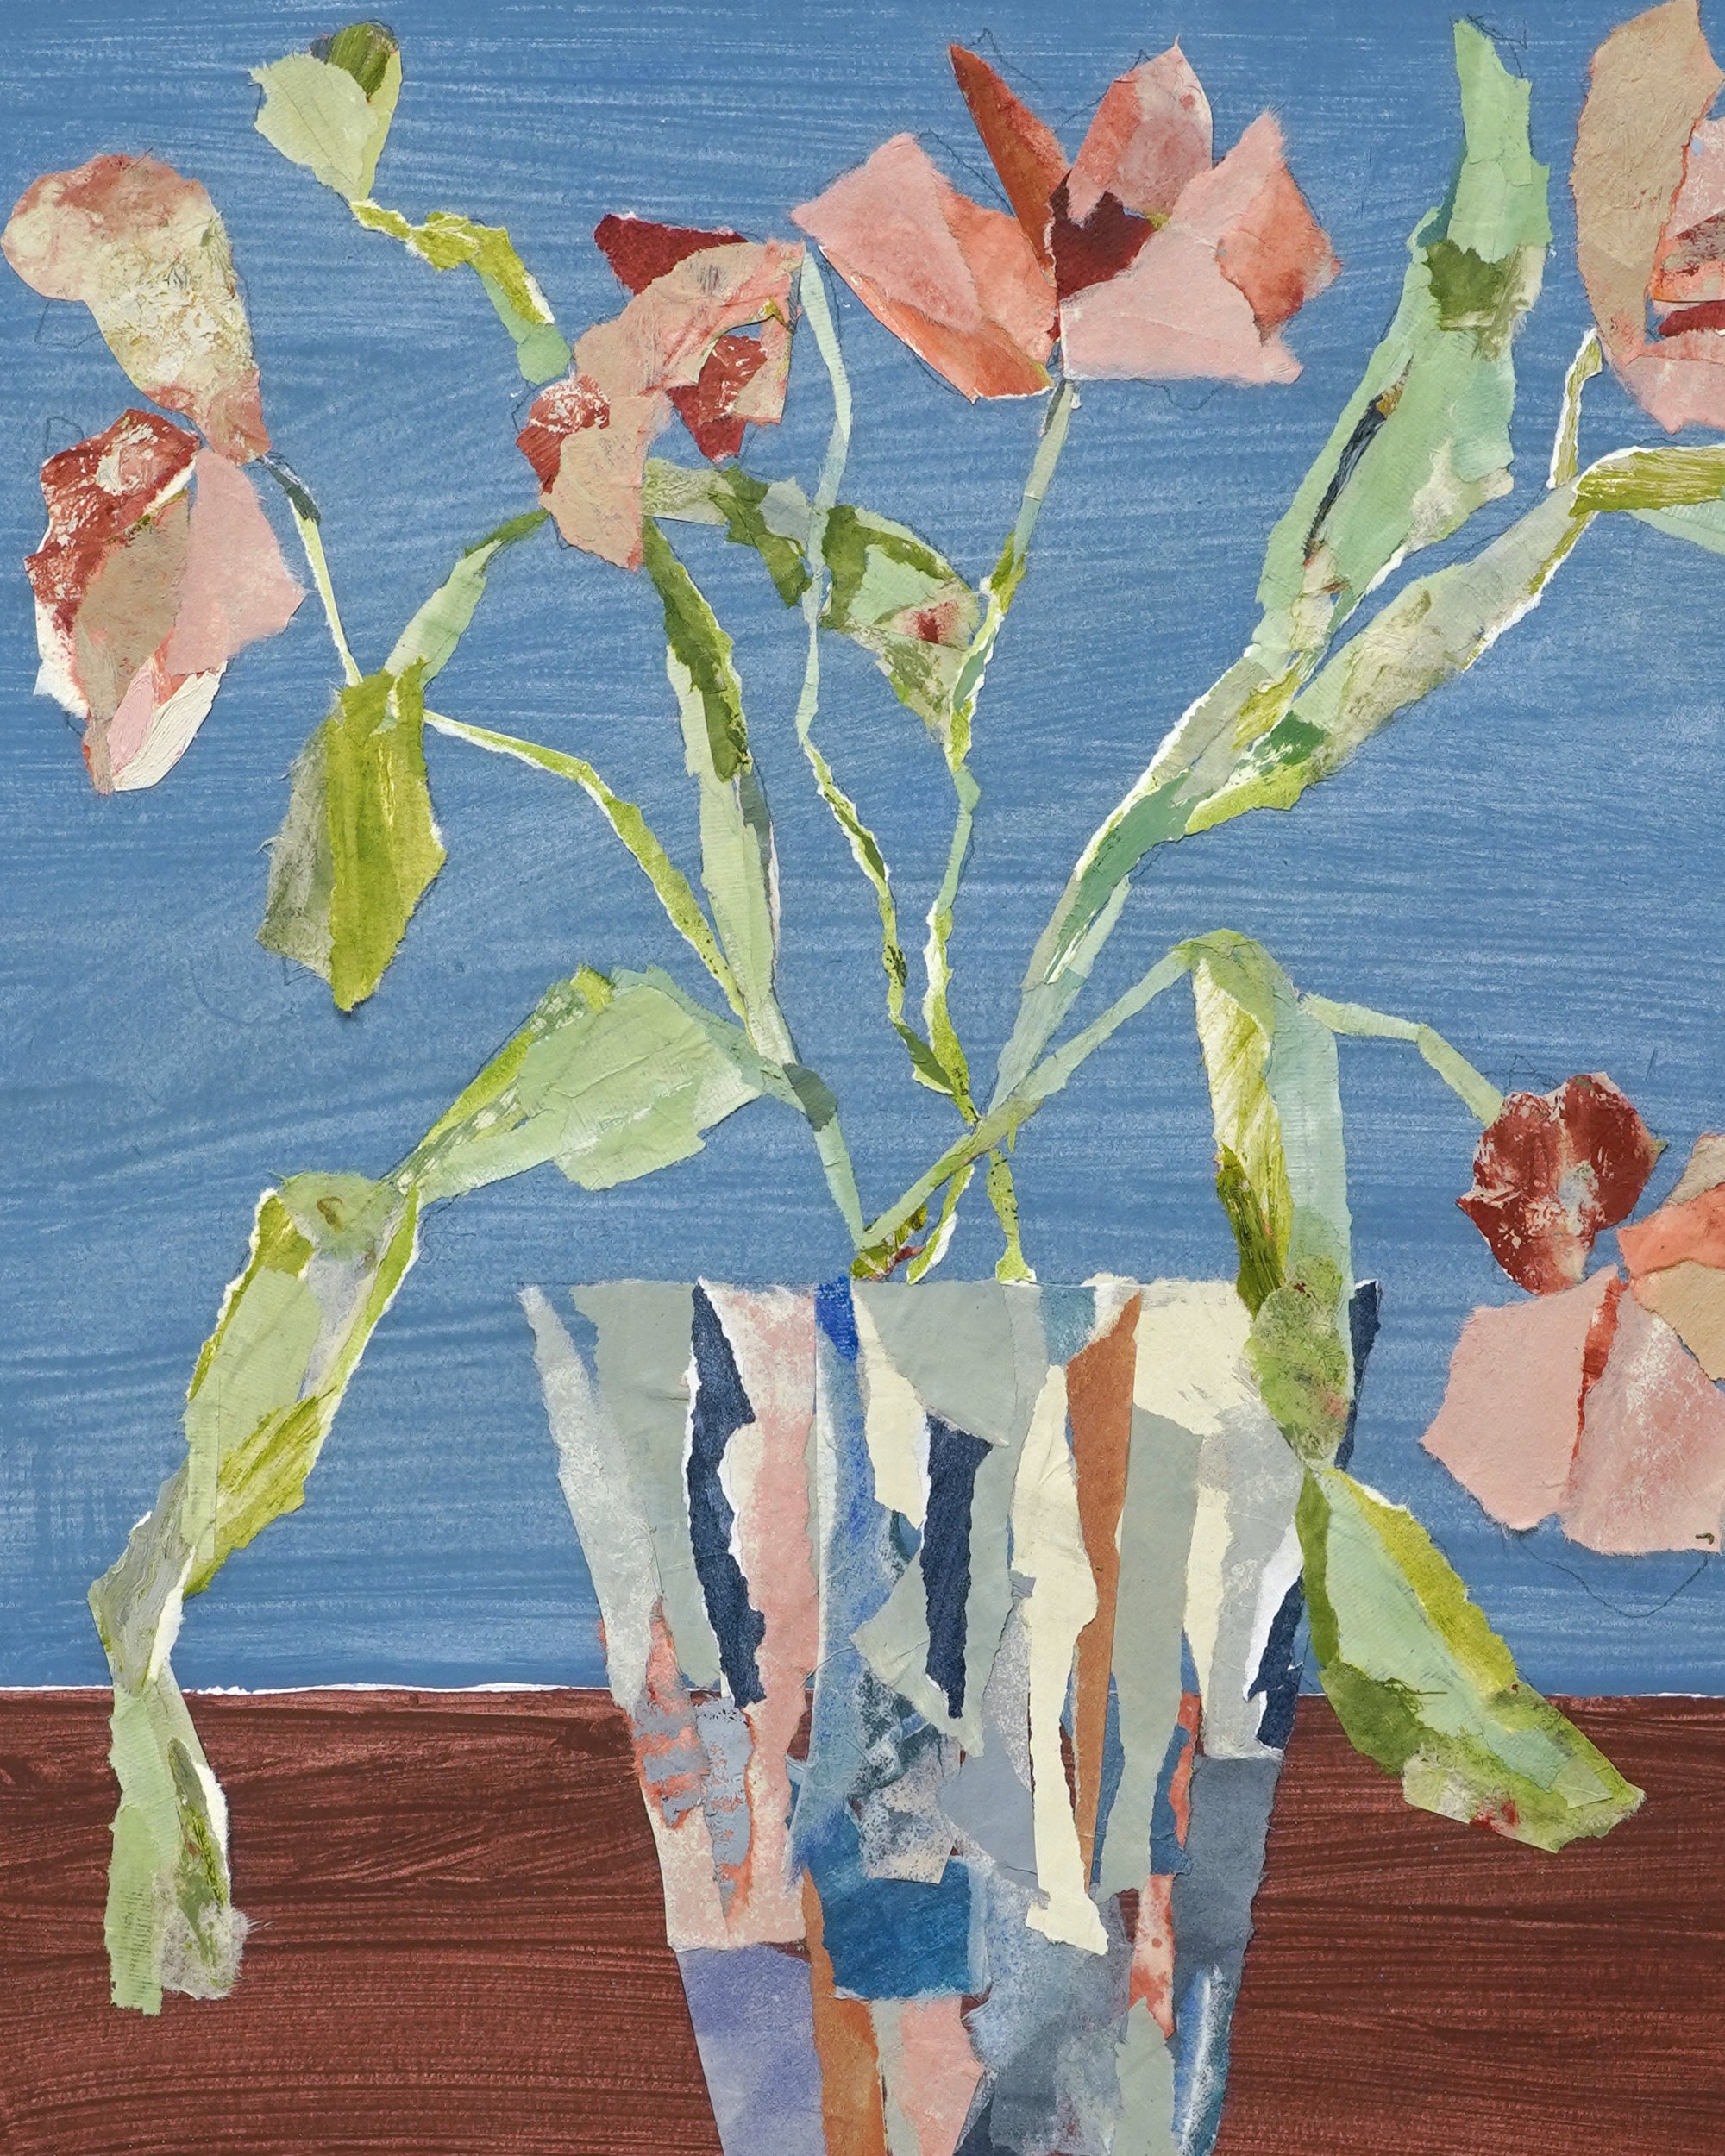 Diana Forbes - Tulips in Striped Vase II